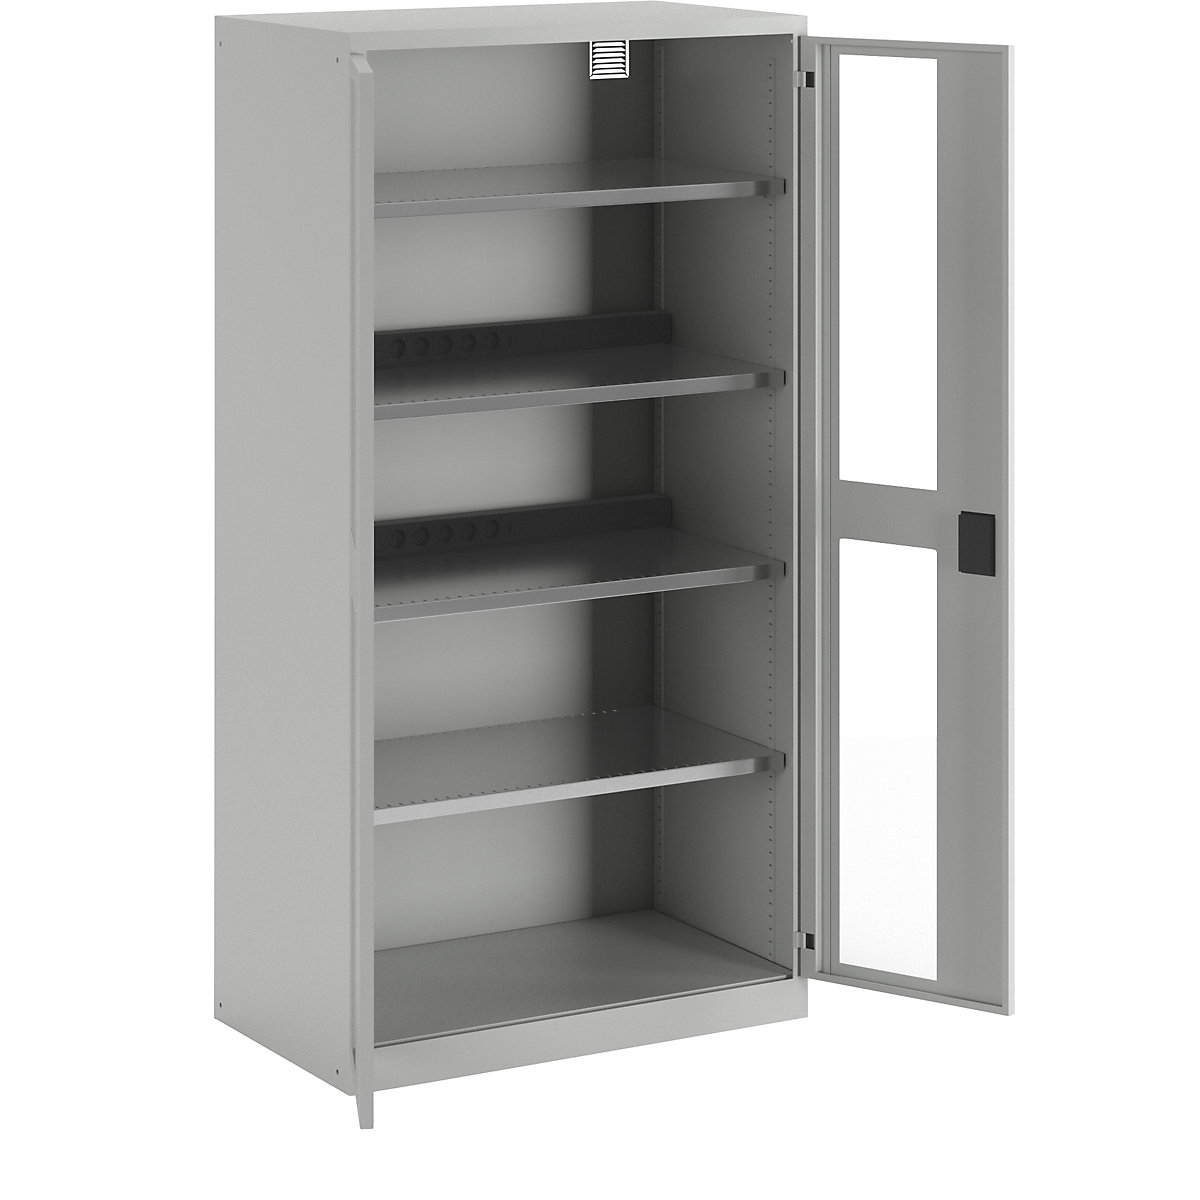 Battery charging cabinet – LISTA, 4 shelves, vision panel doors, 2 power strips at rear, grey-11